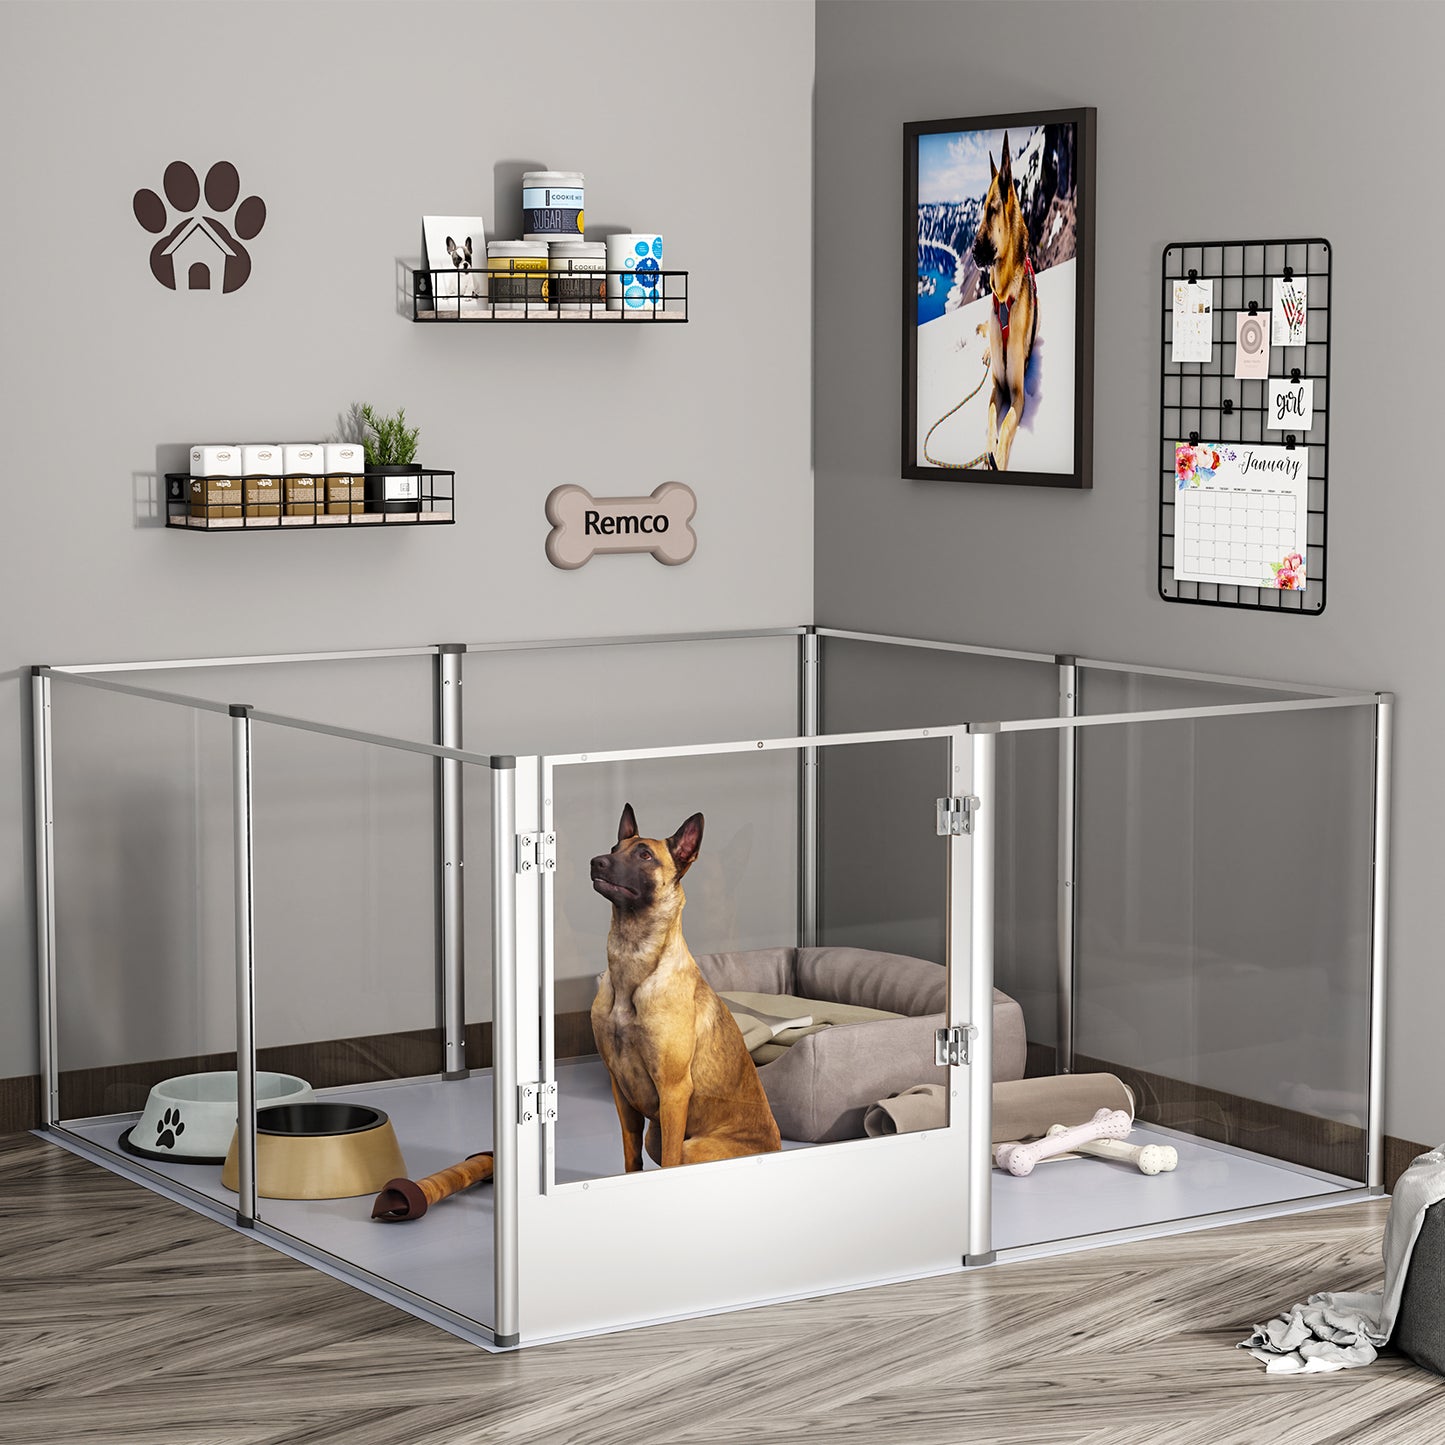 Acrylic Dog Playpen Fence: Indoor Pet Whelping Pen Box Dog Playpen Kennel 32in Taller with Waterproof Fertility Pad for Puppies, Rabbits, Guinea Pig